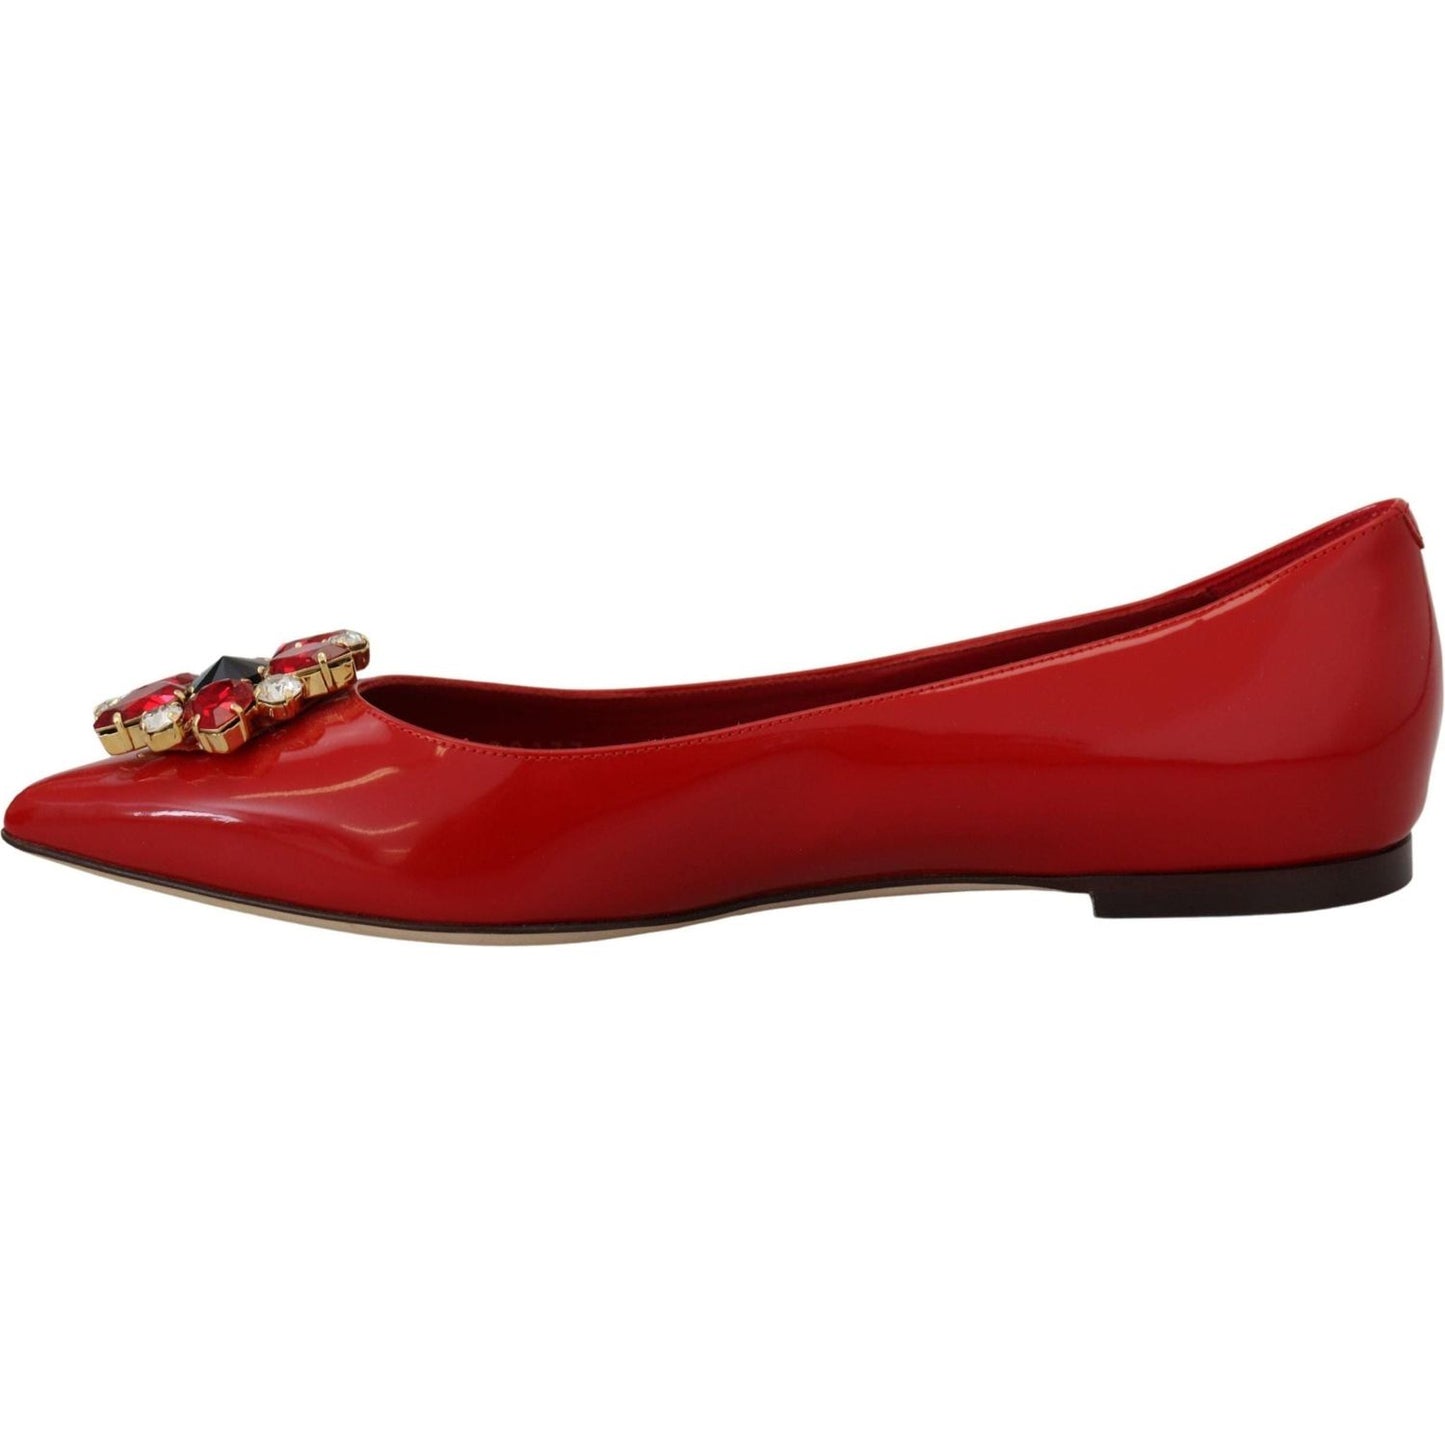 Dolce & Gabbana Red Suede Crystal Loafers - Exquisite Elegance red-leather-crystals-loafers-flats-shoes IMG_8711-scaled-69206a64-402.jpg